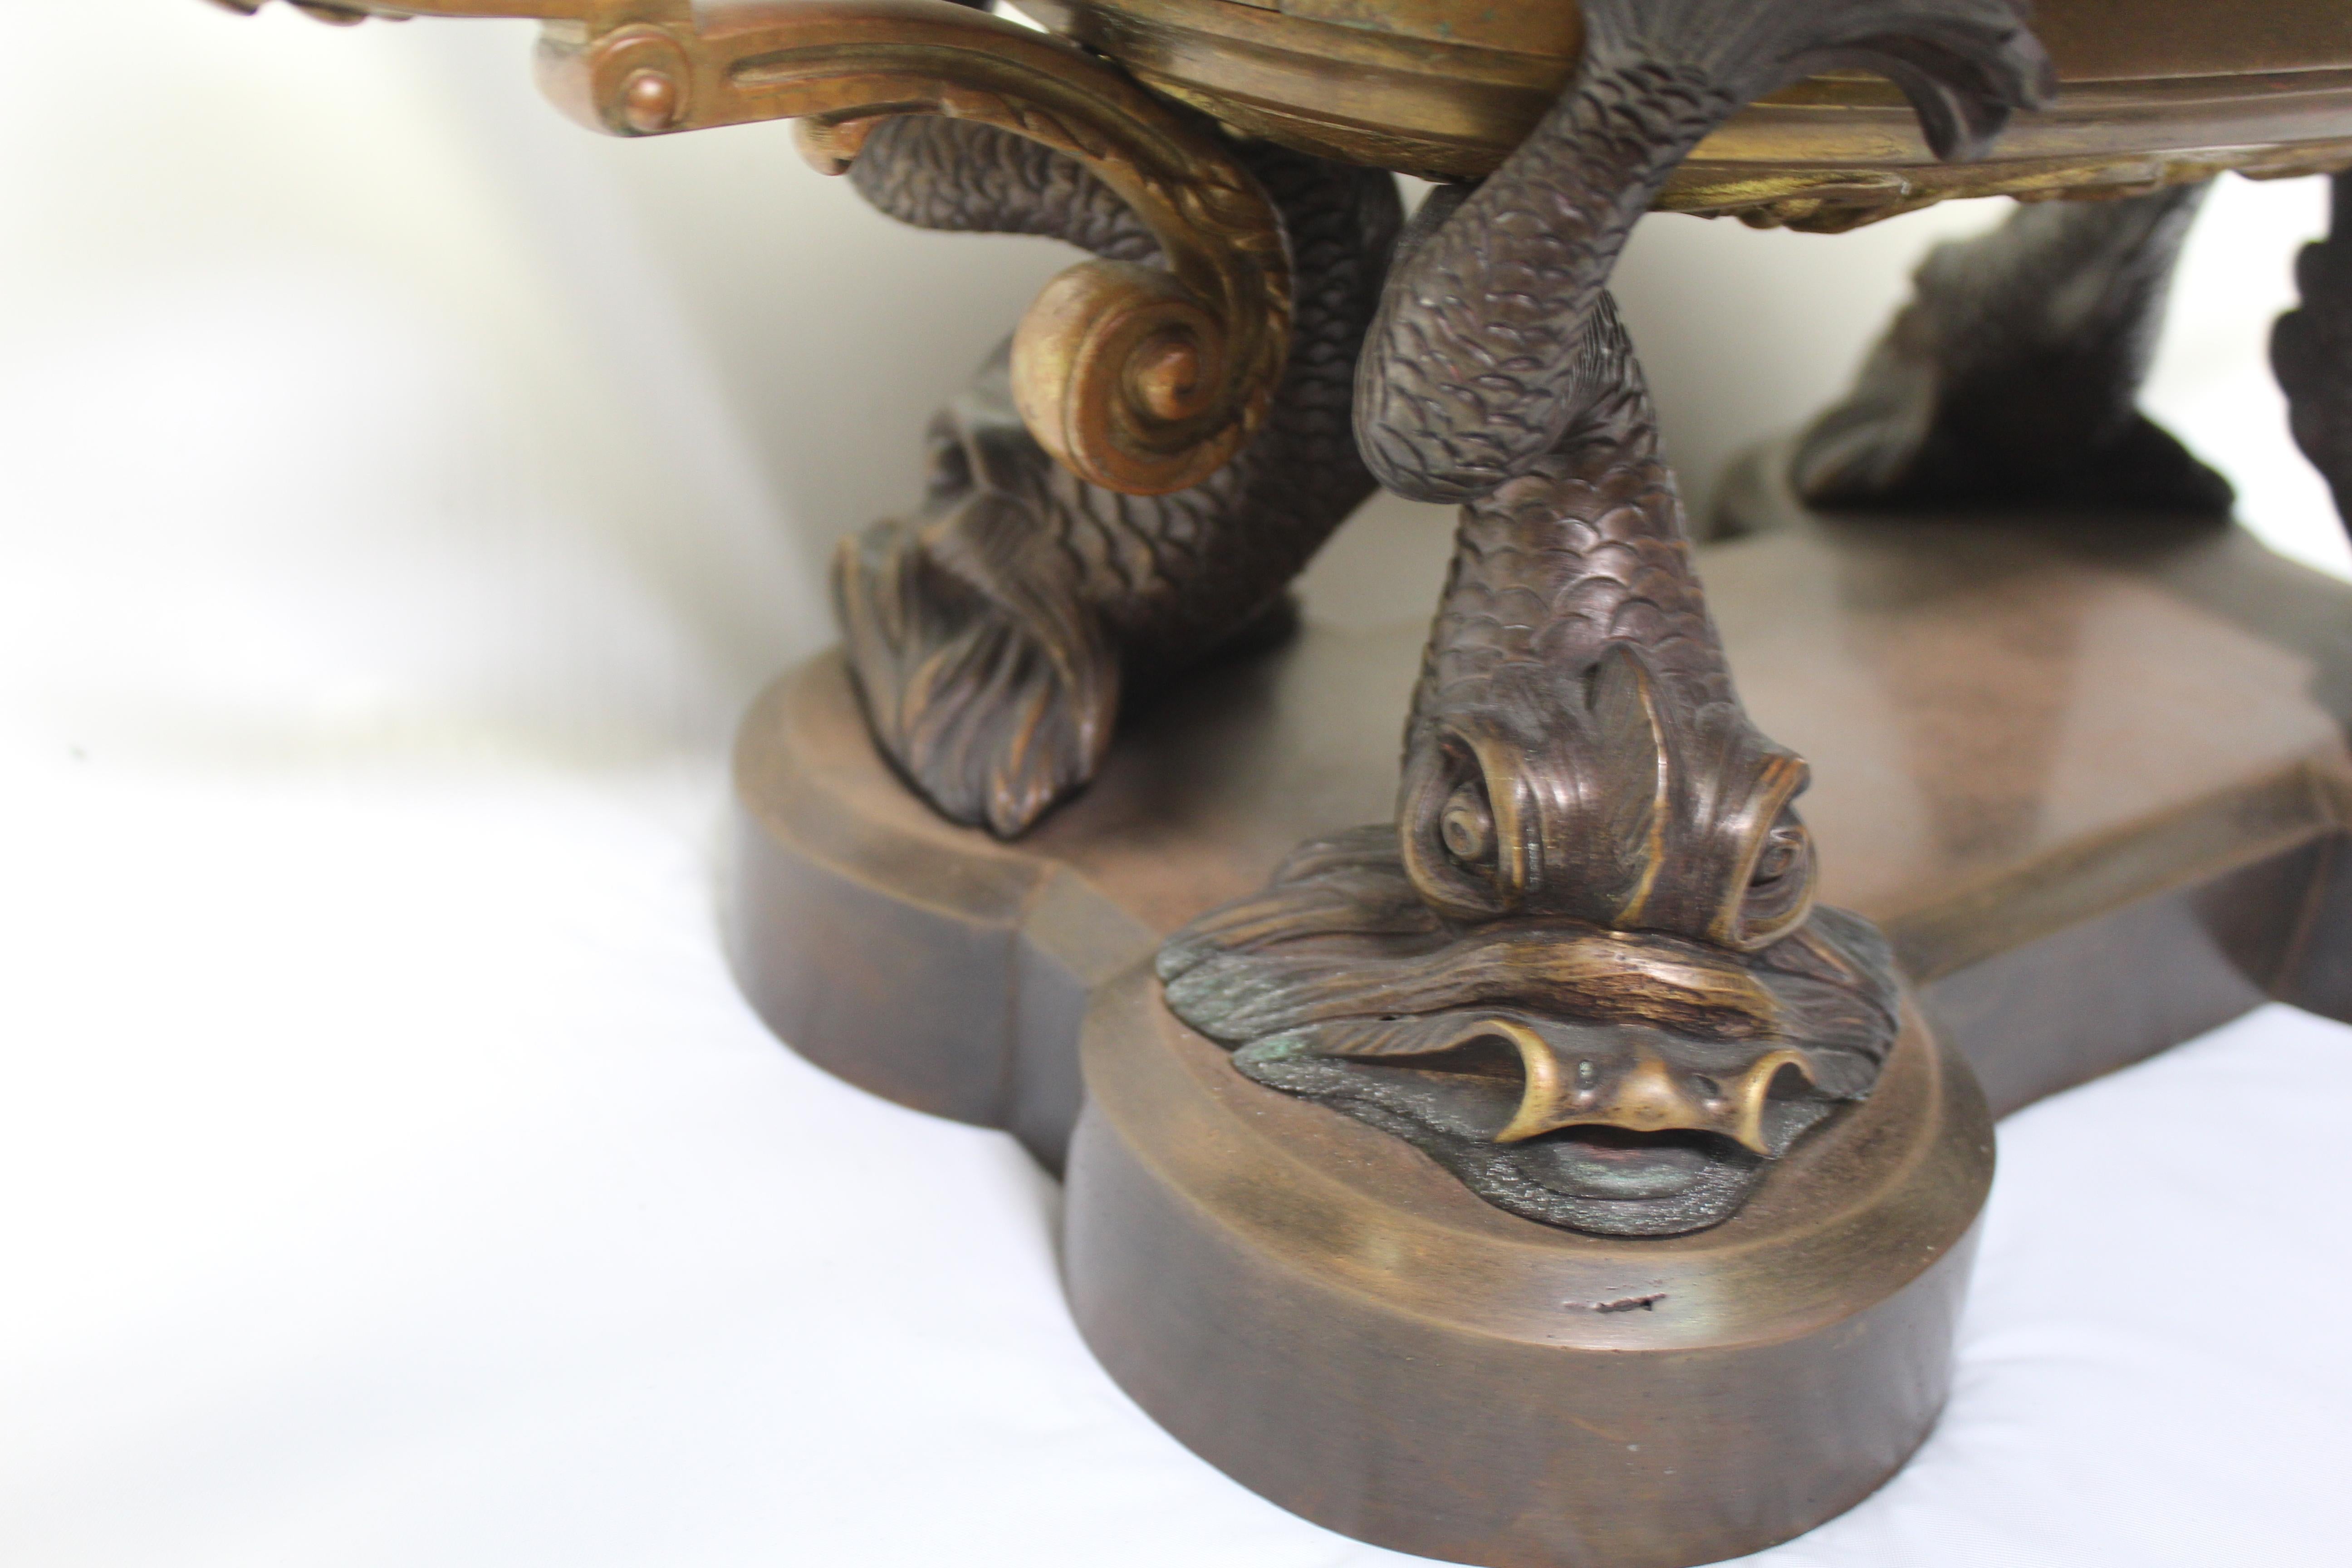 A rare find of this centerpiece bowl in a golden Dore' finish. With two winged nude Angles for handles. All supported by four Dolphins in a bronze patina finish. Still has the Original Bowl insert! I don't think there are any more like it now. A